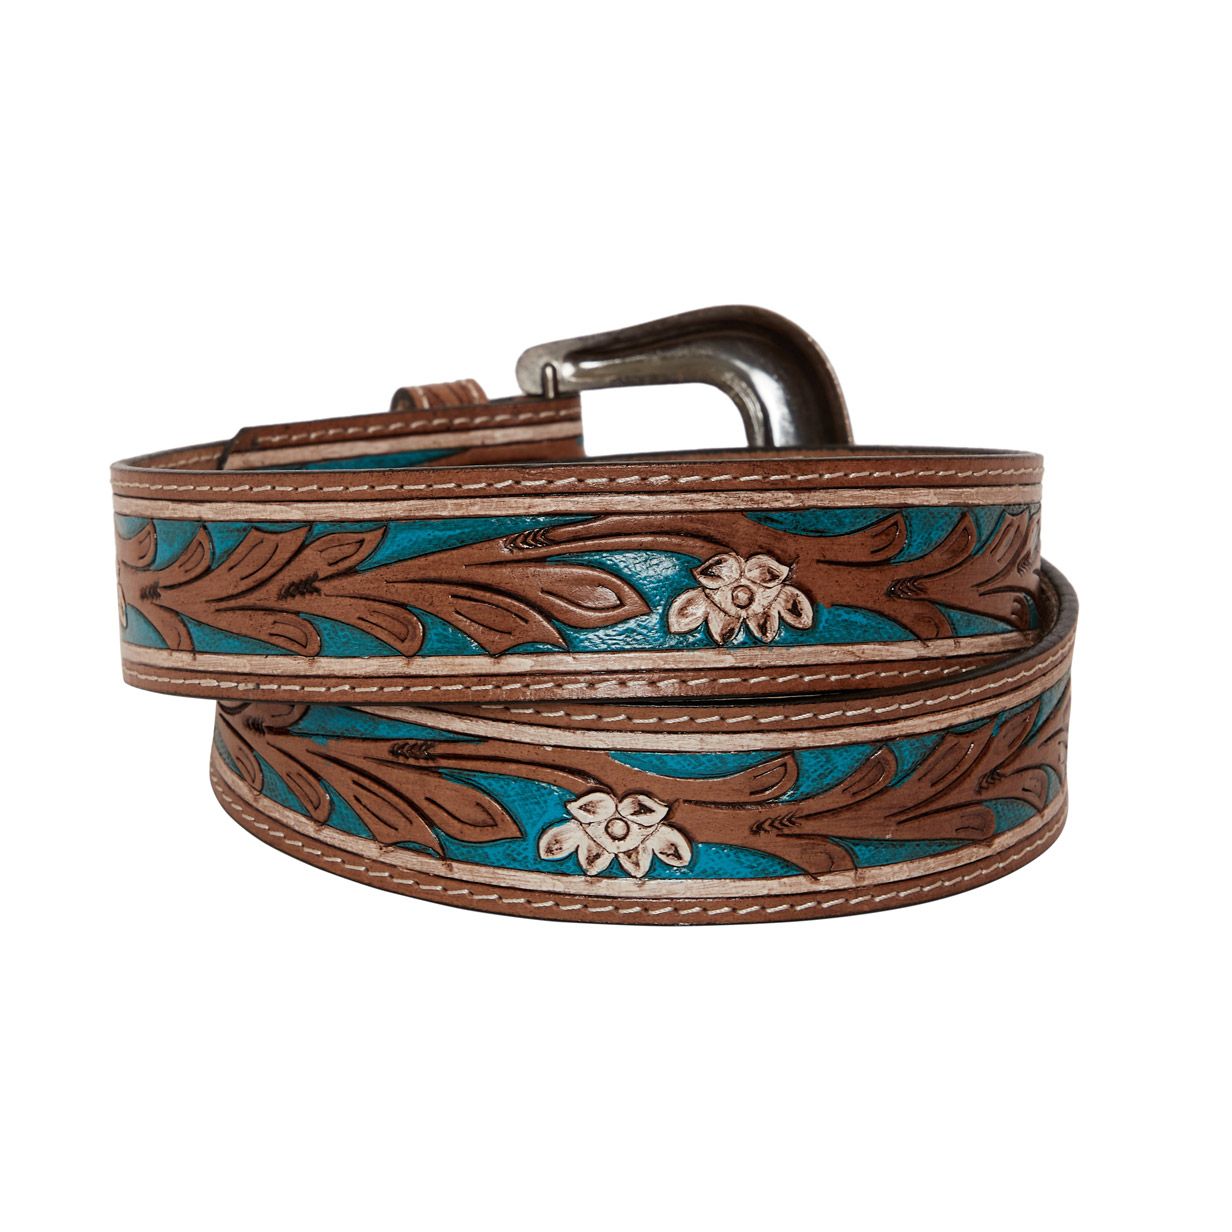 Myra Bag Checkered Brown Hand-Tooled Leather Belt S-4059